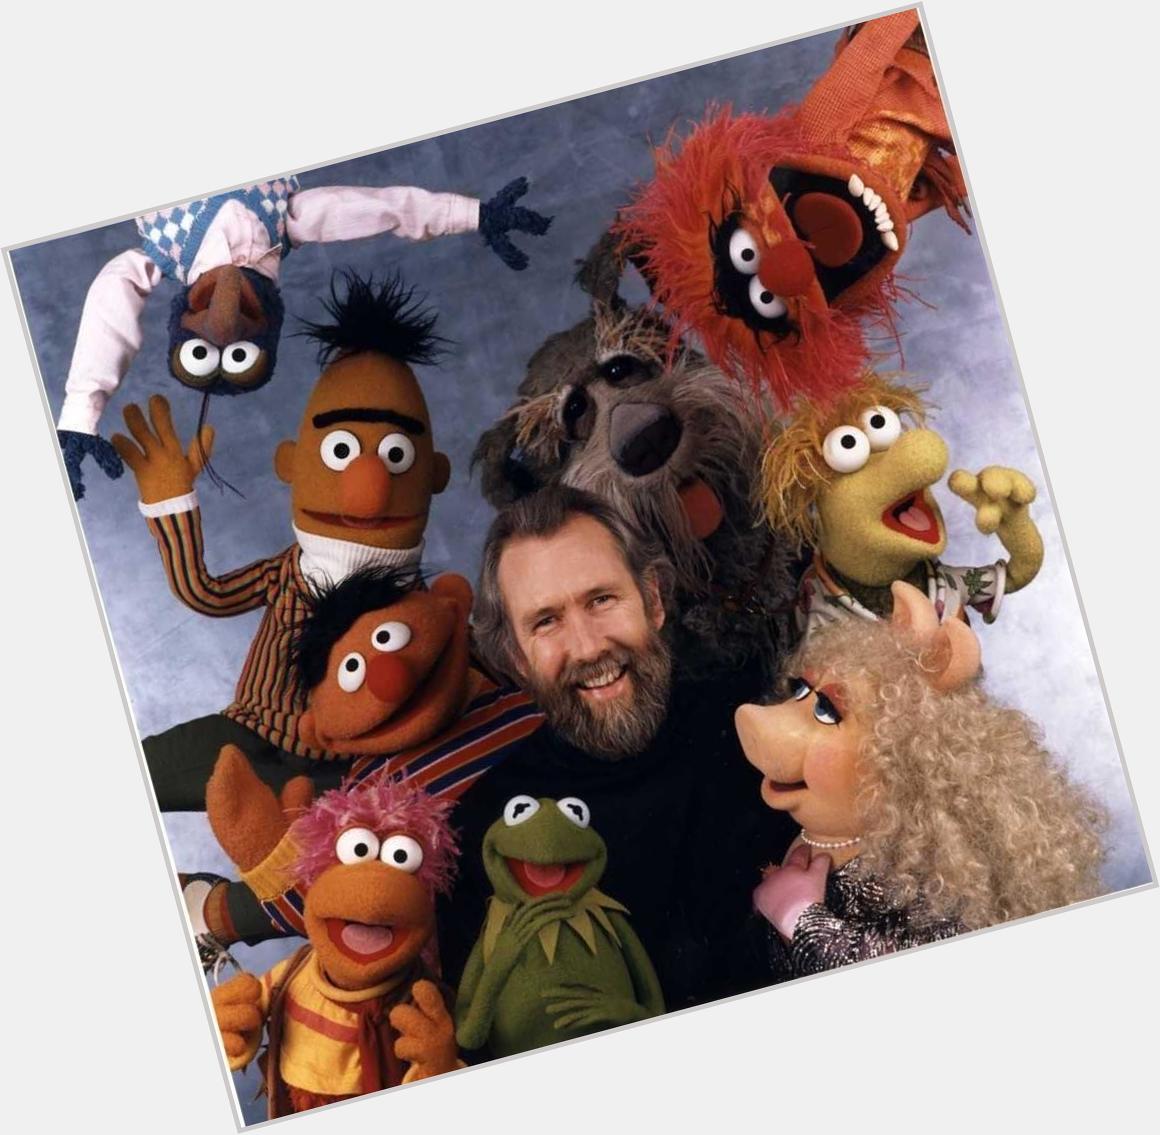 Happy birthday Jim Henson, a man who entertained and inspired generations of lovers and dreamers. 